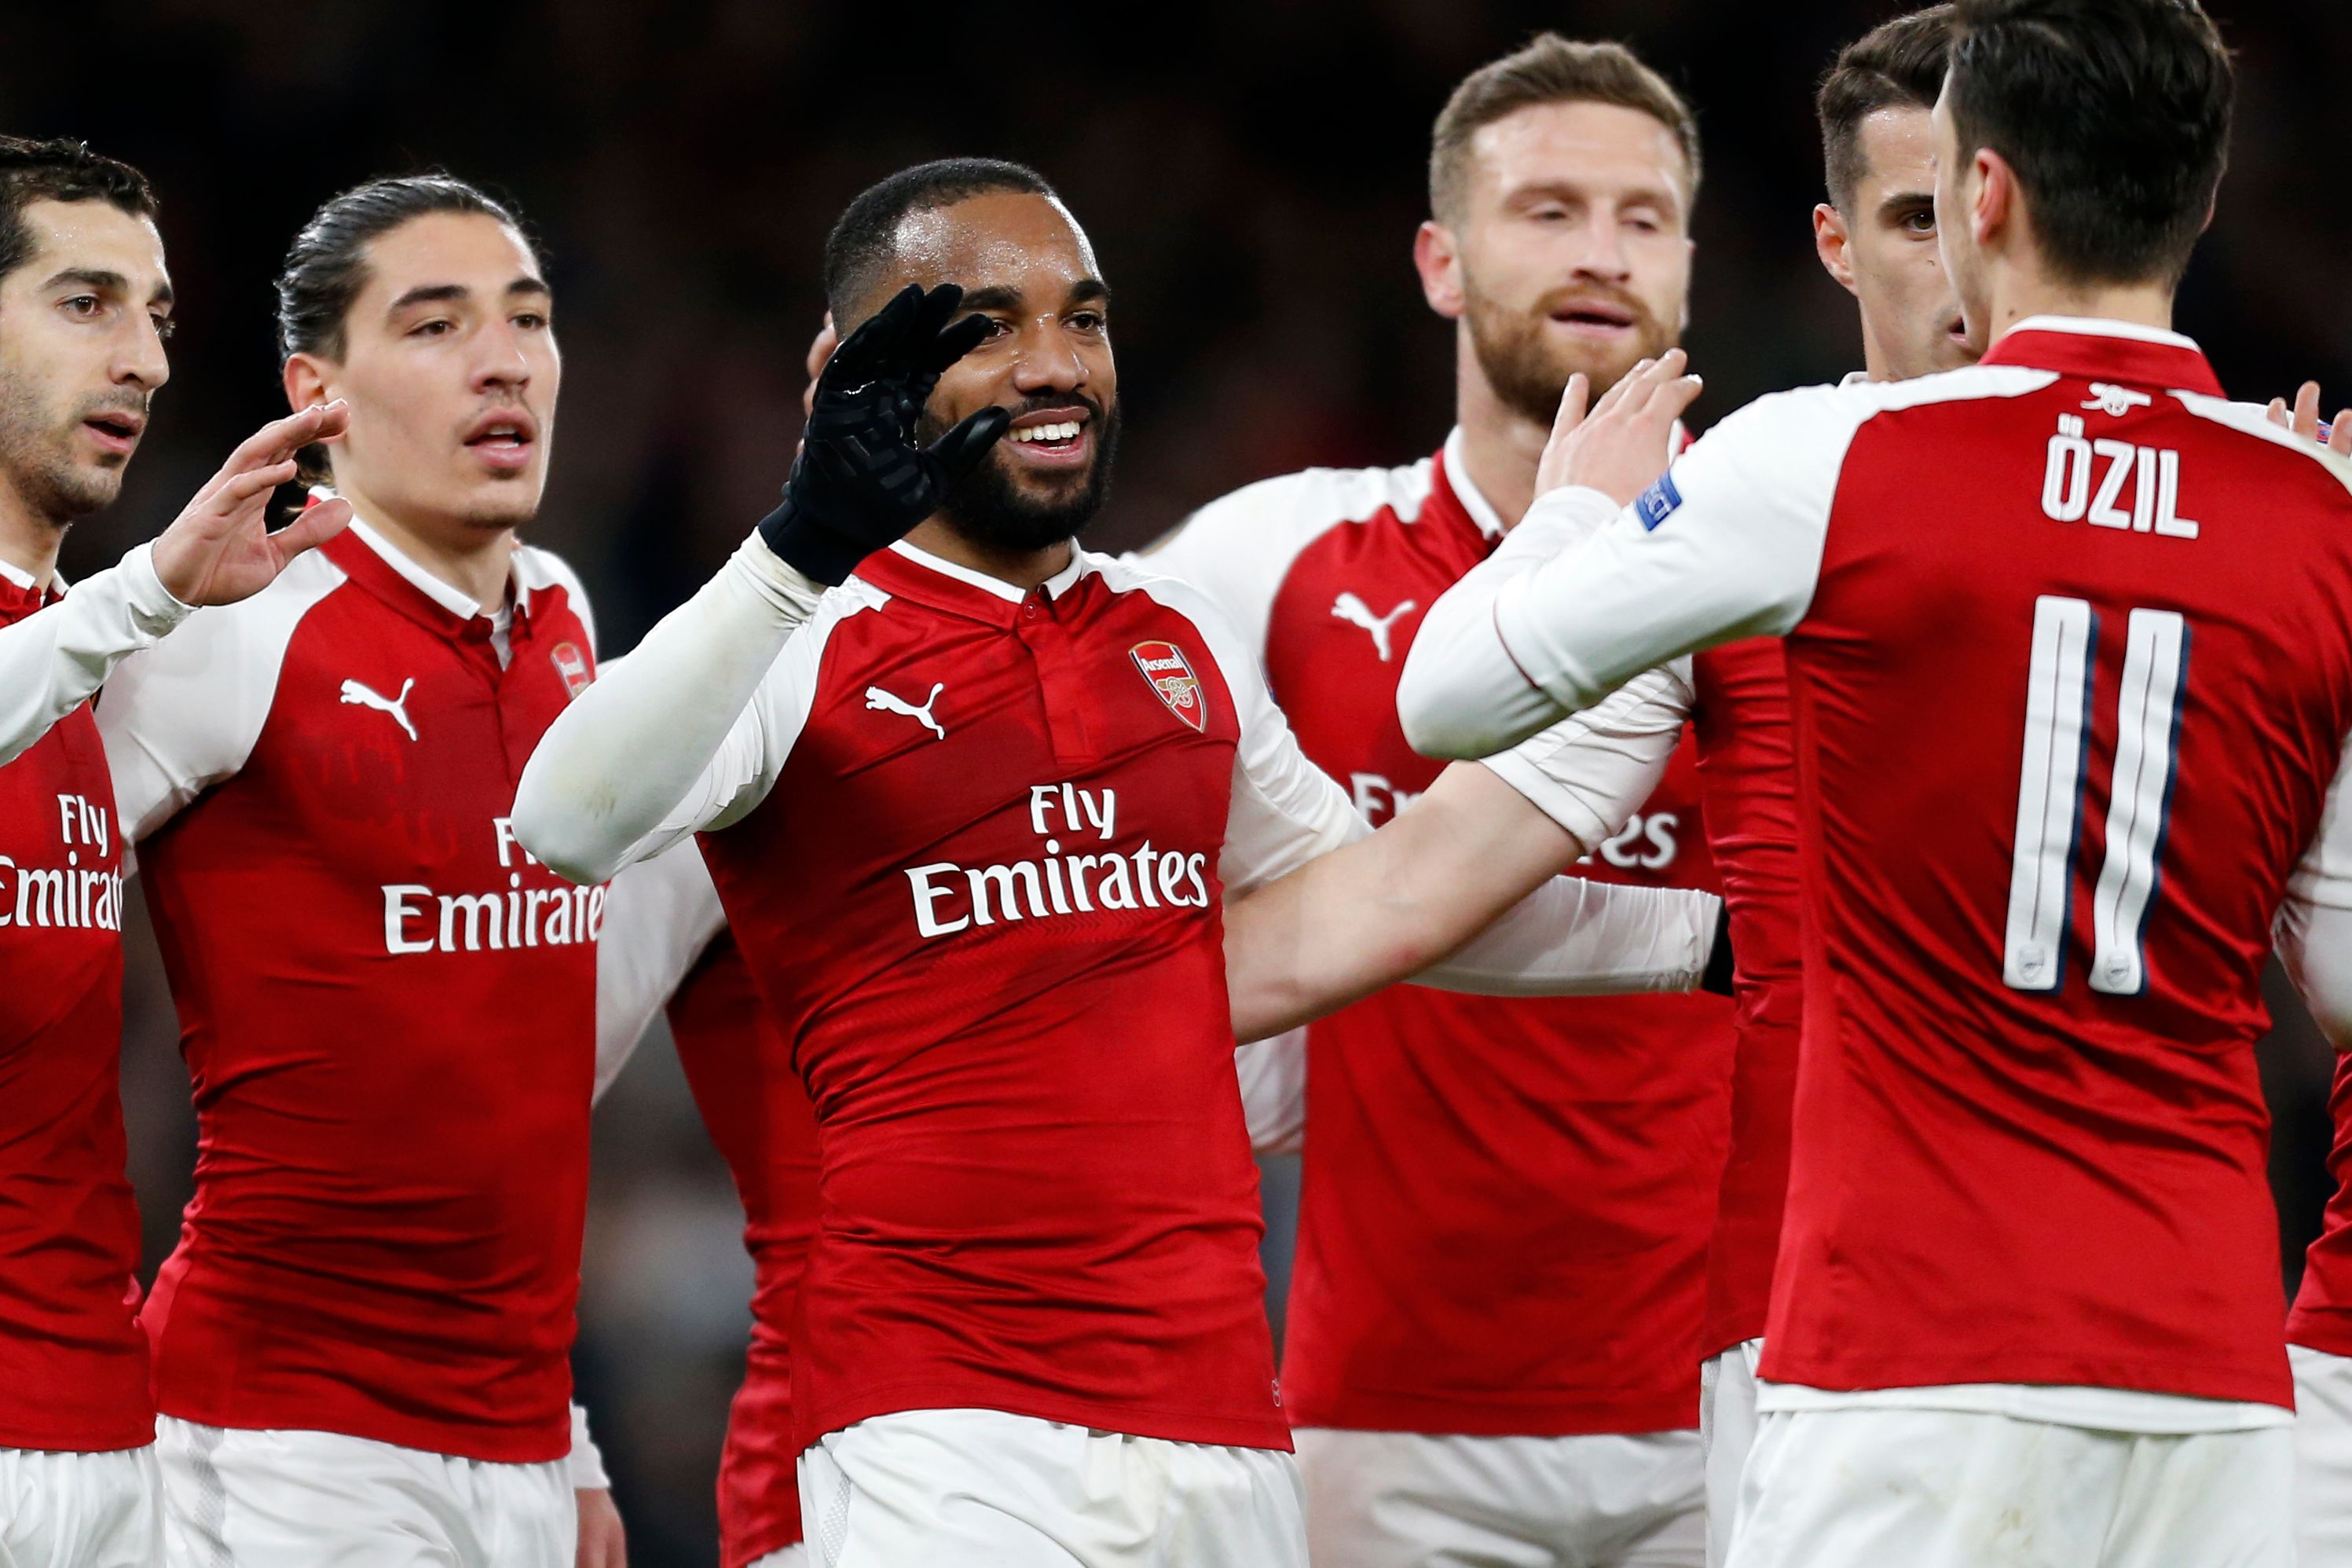 Arsenal's French striker Alexandre Lacazette (C) celebrates with teammates after scoring their fourth goal during the UEFA Europa League first leg quarter-final football match  between Arsenal and CSKA Moscow at the Emirates Stadium in London on April 5, 2018.  / AFP PHOTO / IKIMAGES / Ian KINGTON        (Photo credit should read IAN KINGTON/AFP/Getty Images)